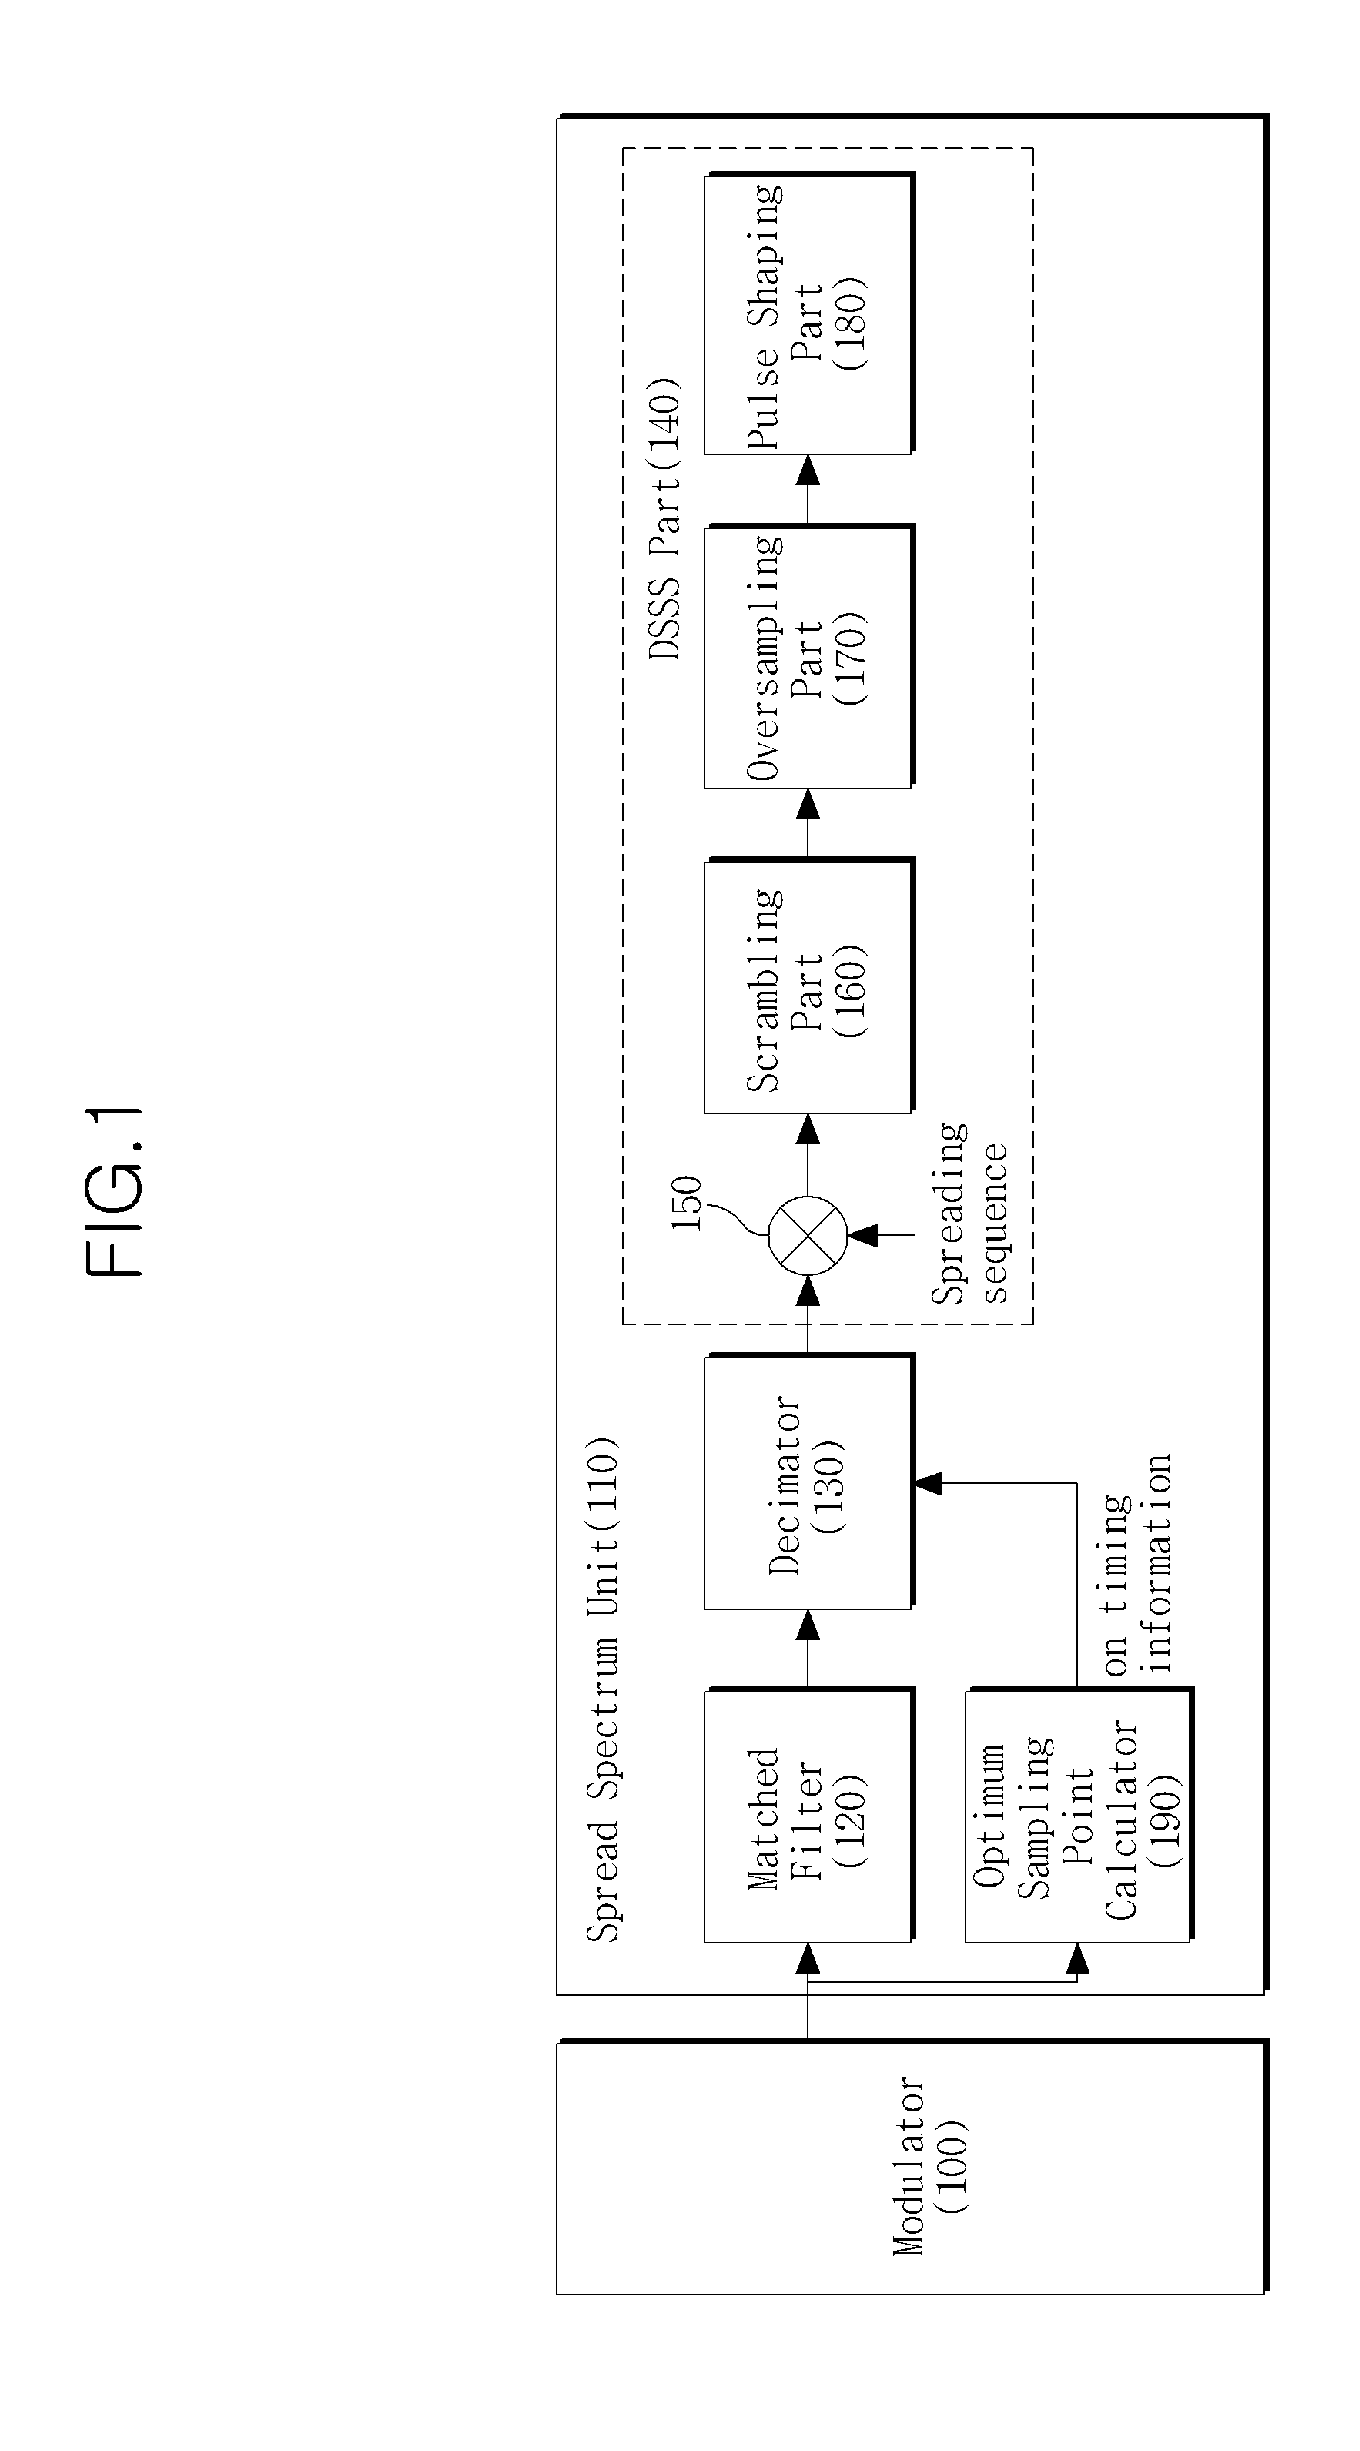 Satellite communication transmitter and receiver for reducing channel interference